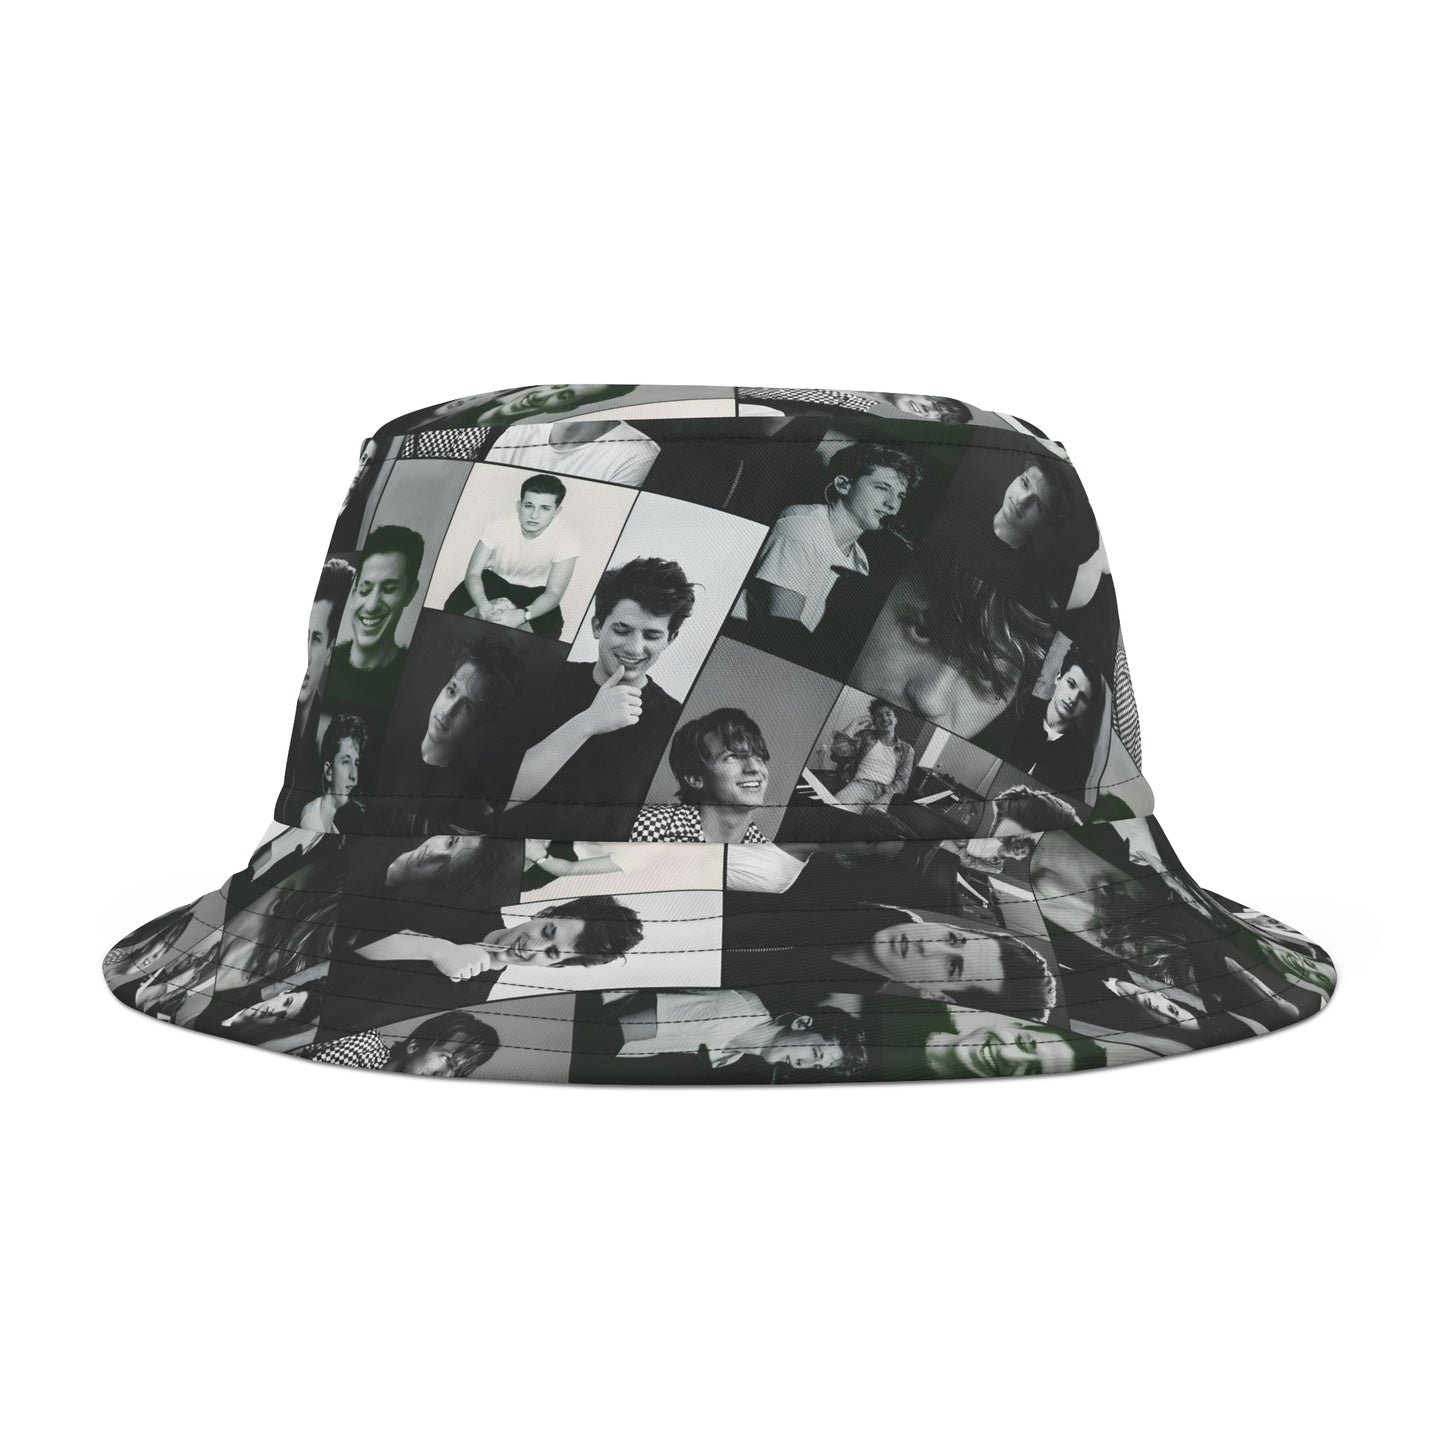 Charlie Puth Black And White Portraits Collage Bucket Hat